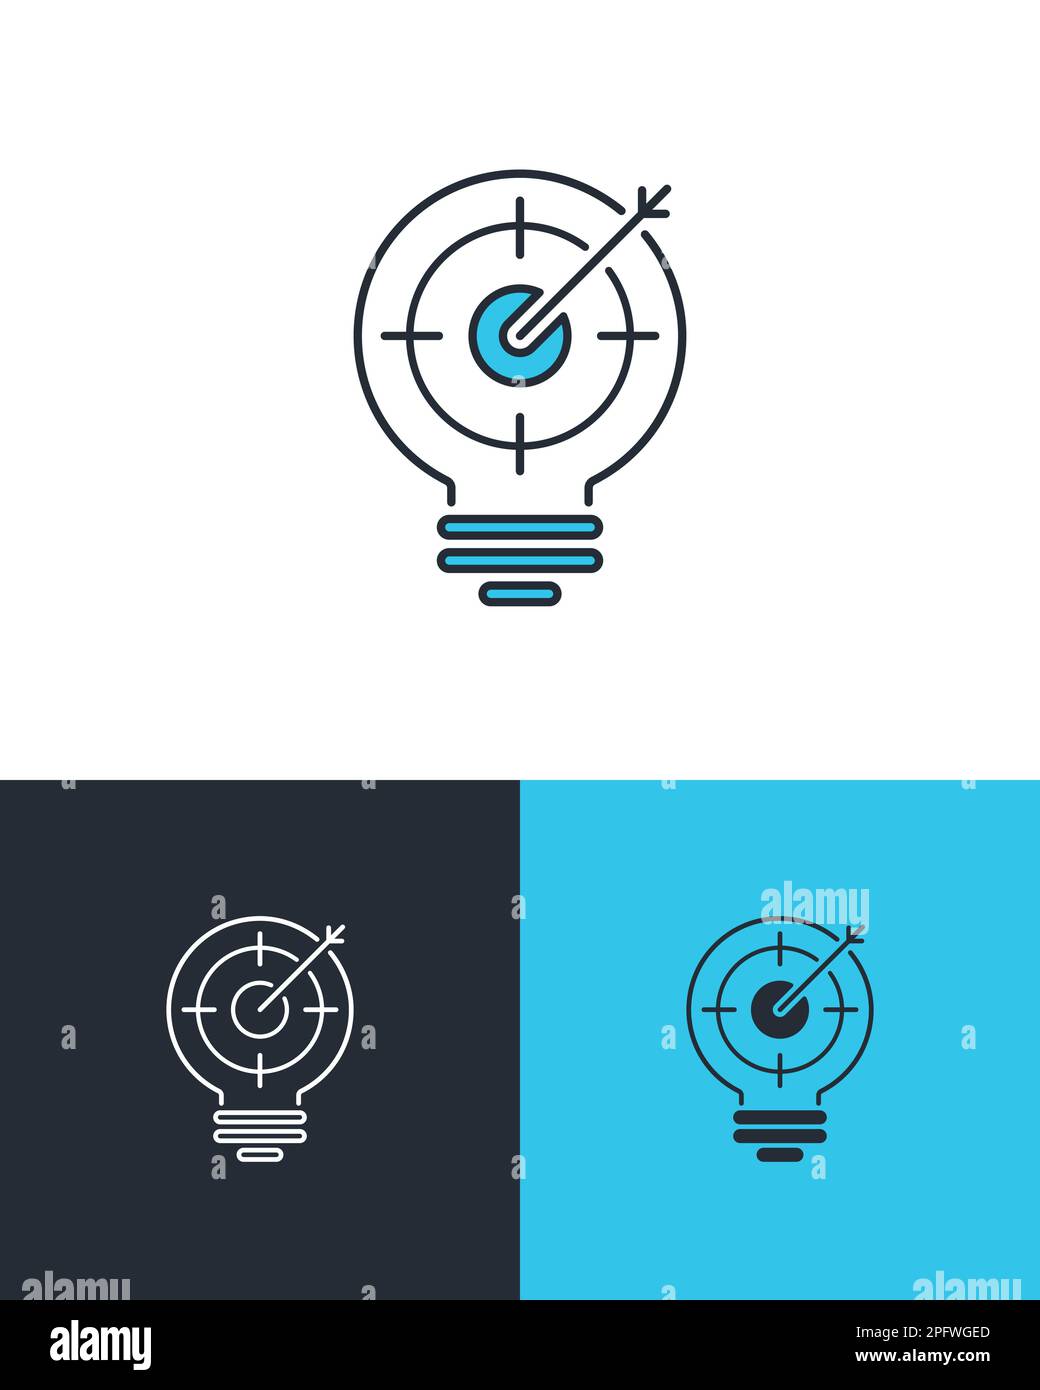 Idea and aiming concept. Light bulb symbol with target and arrow. Vector icons on 3 different backgrounds. Stock Vector